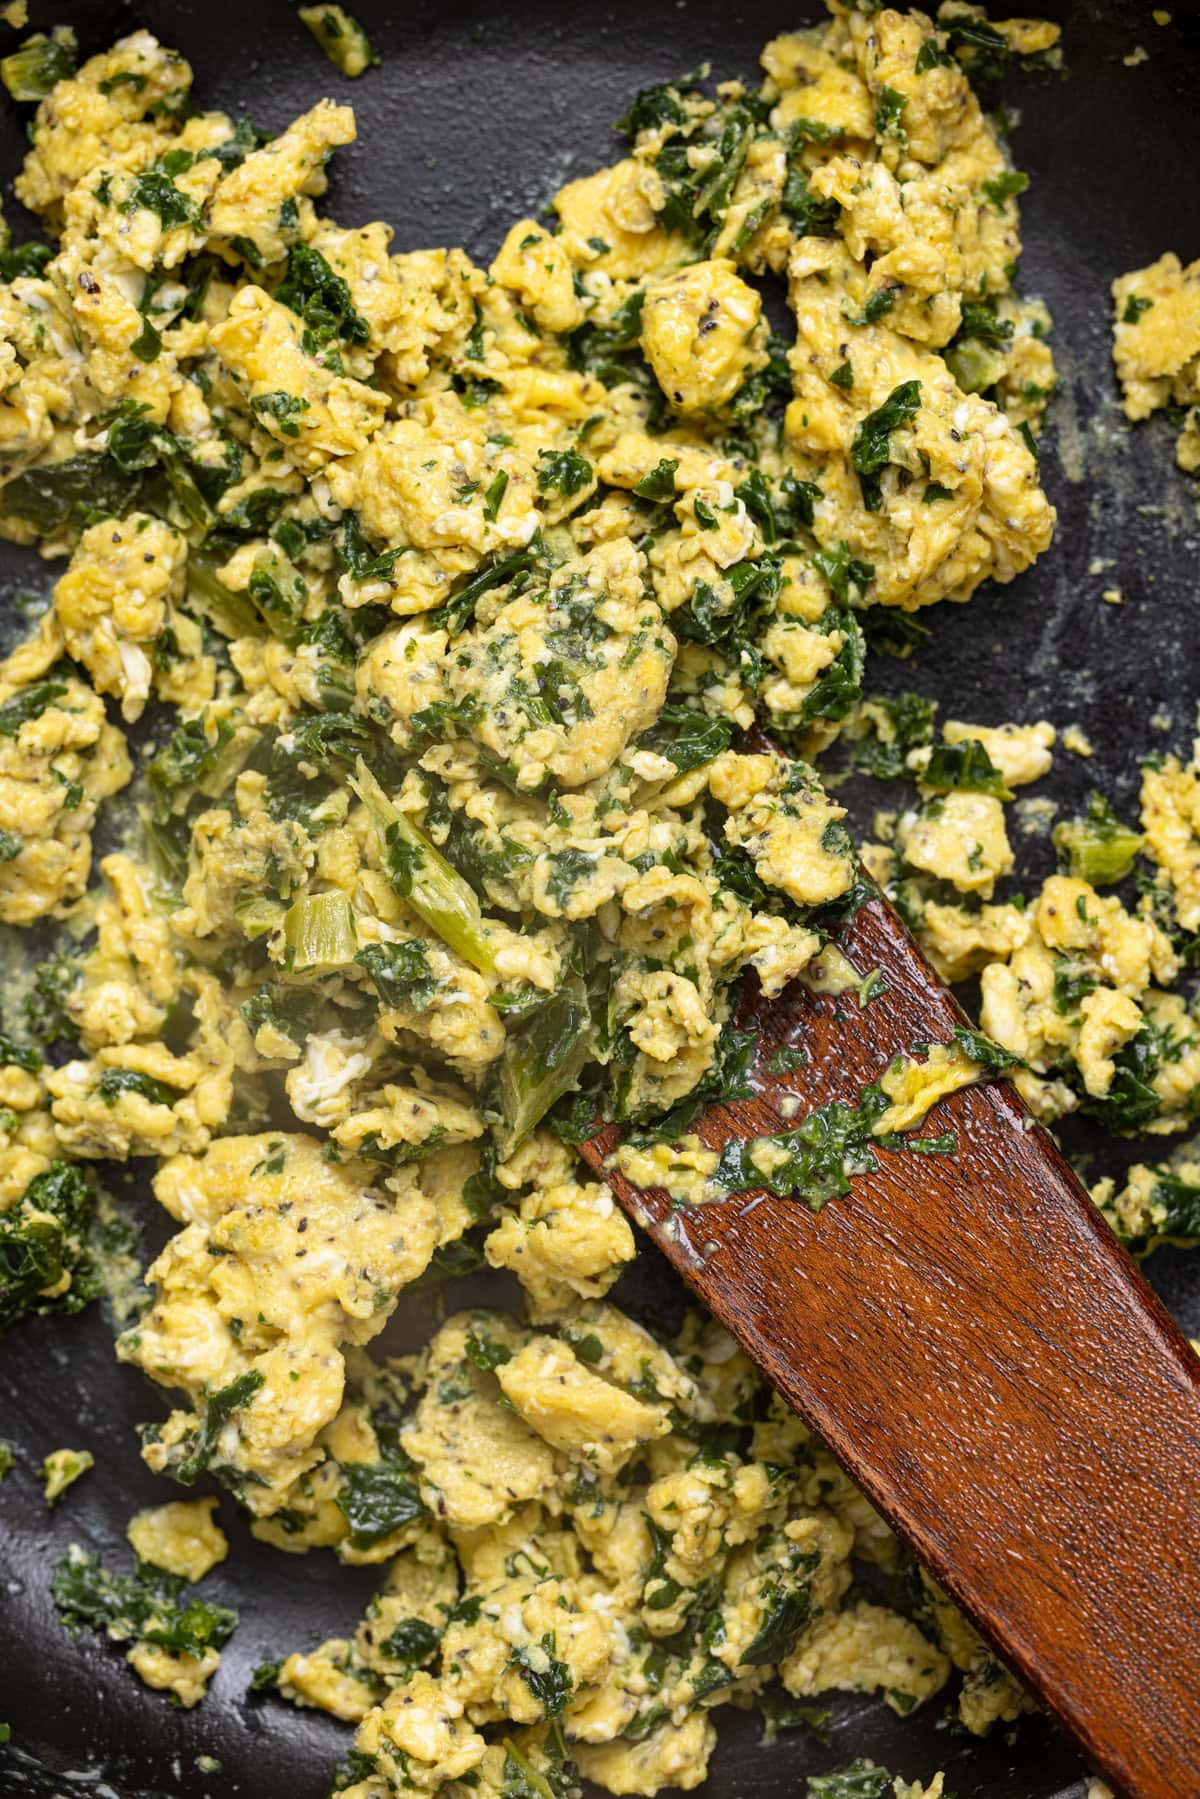 Scrambled eggs in a skillet with a wooden spoon.